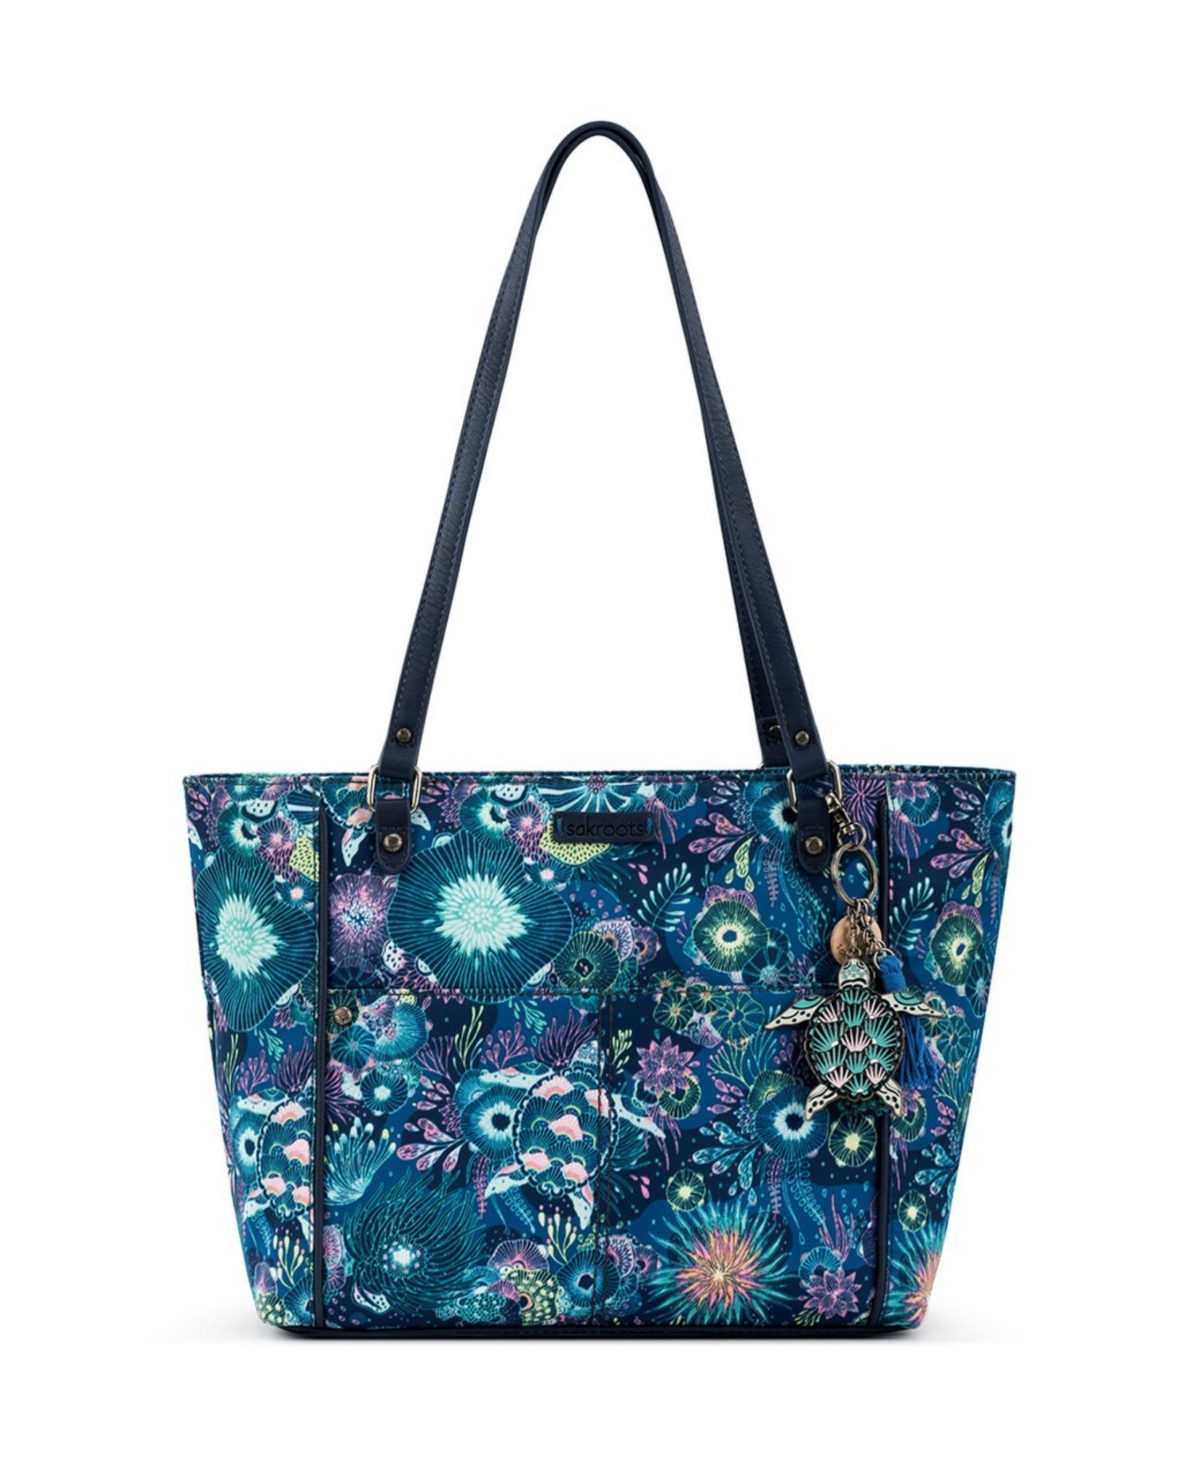 Women's Recycled Ecotwill Metro Tote Bag - Midnight Seascape